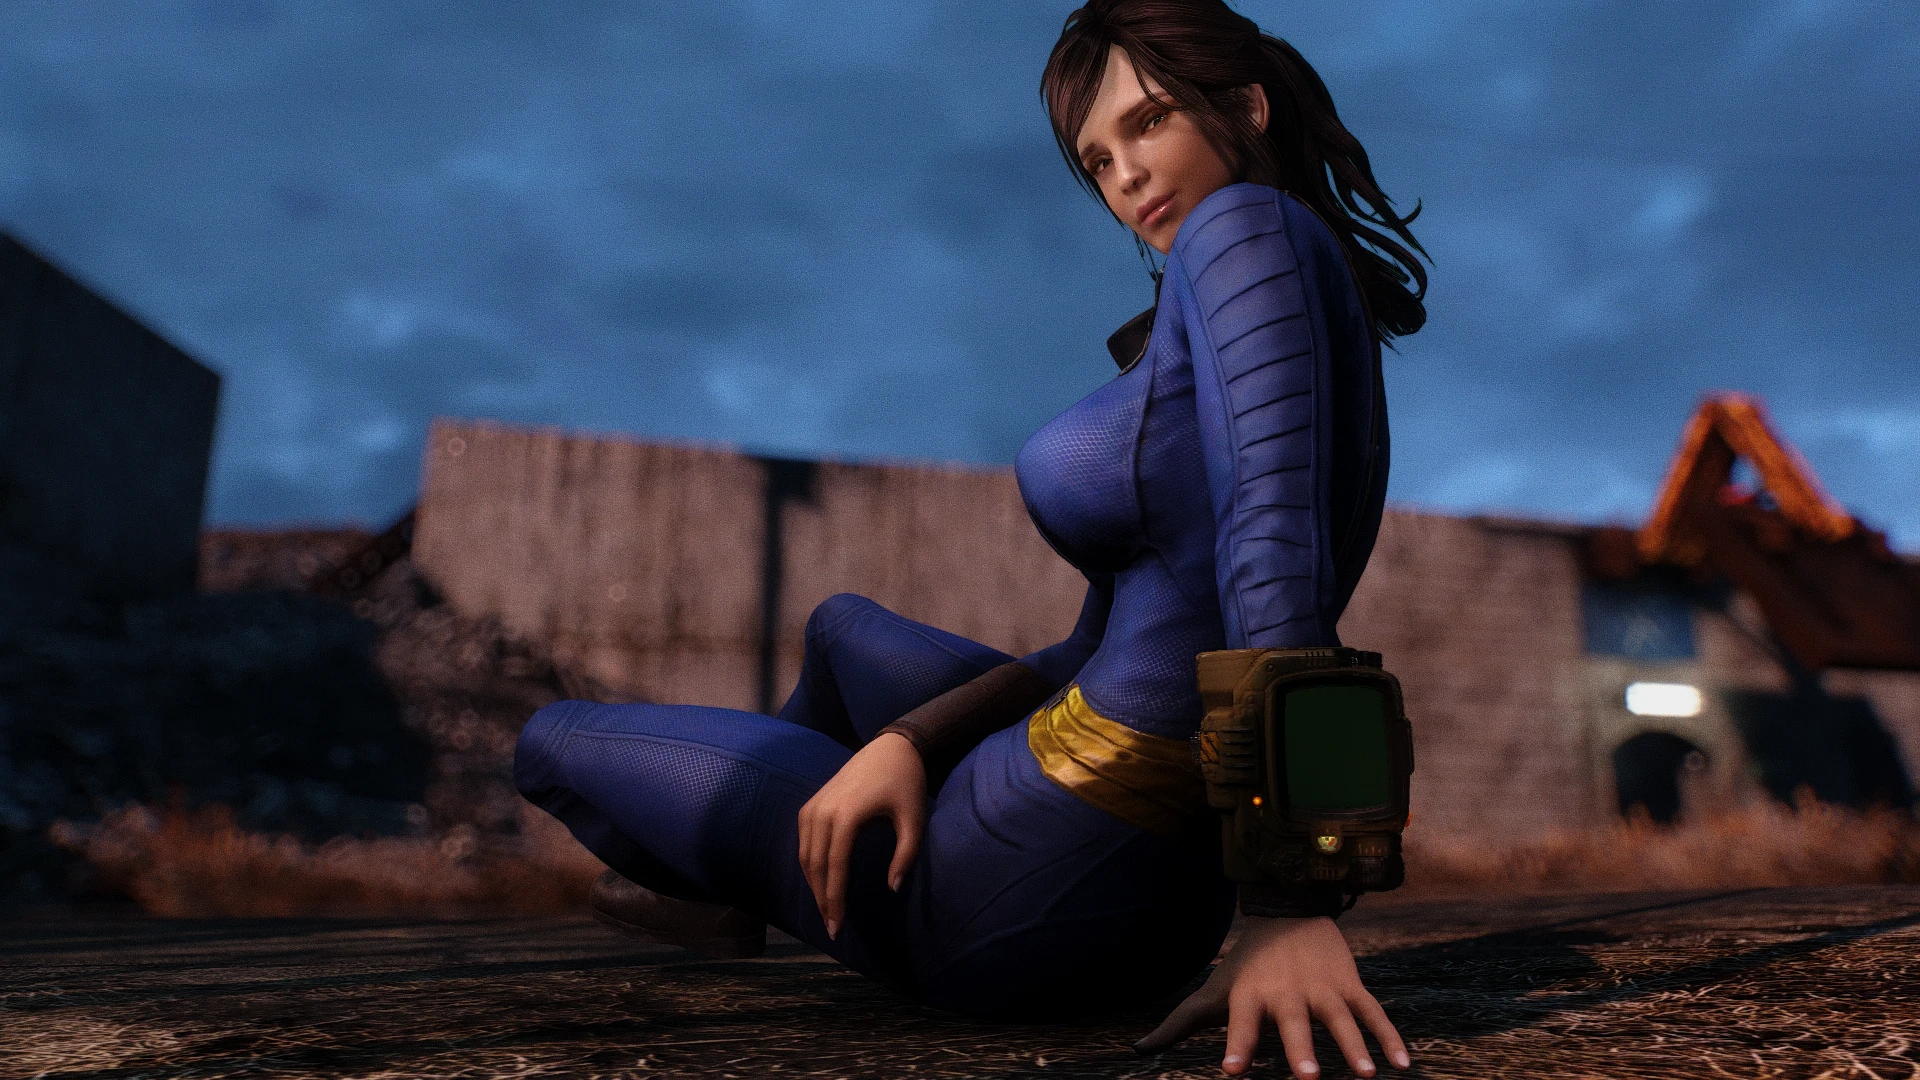 outfit studio fallout 4